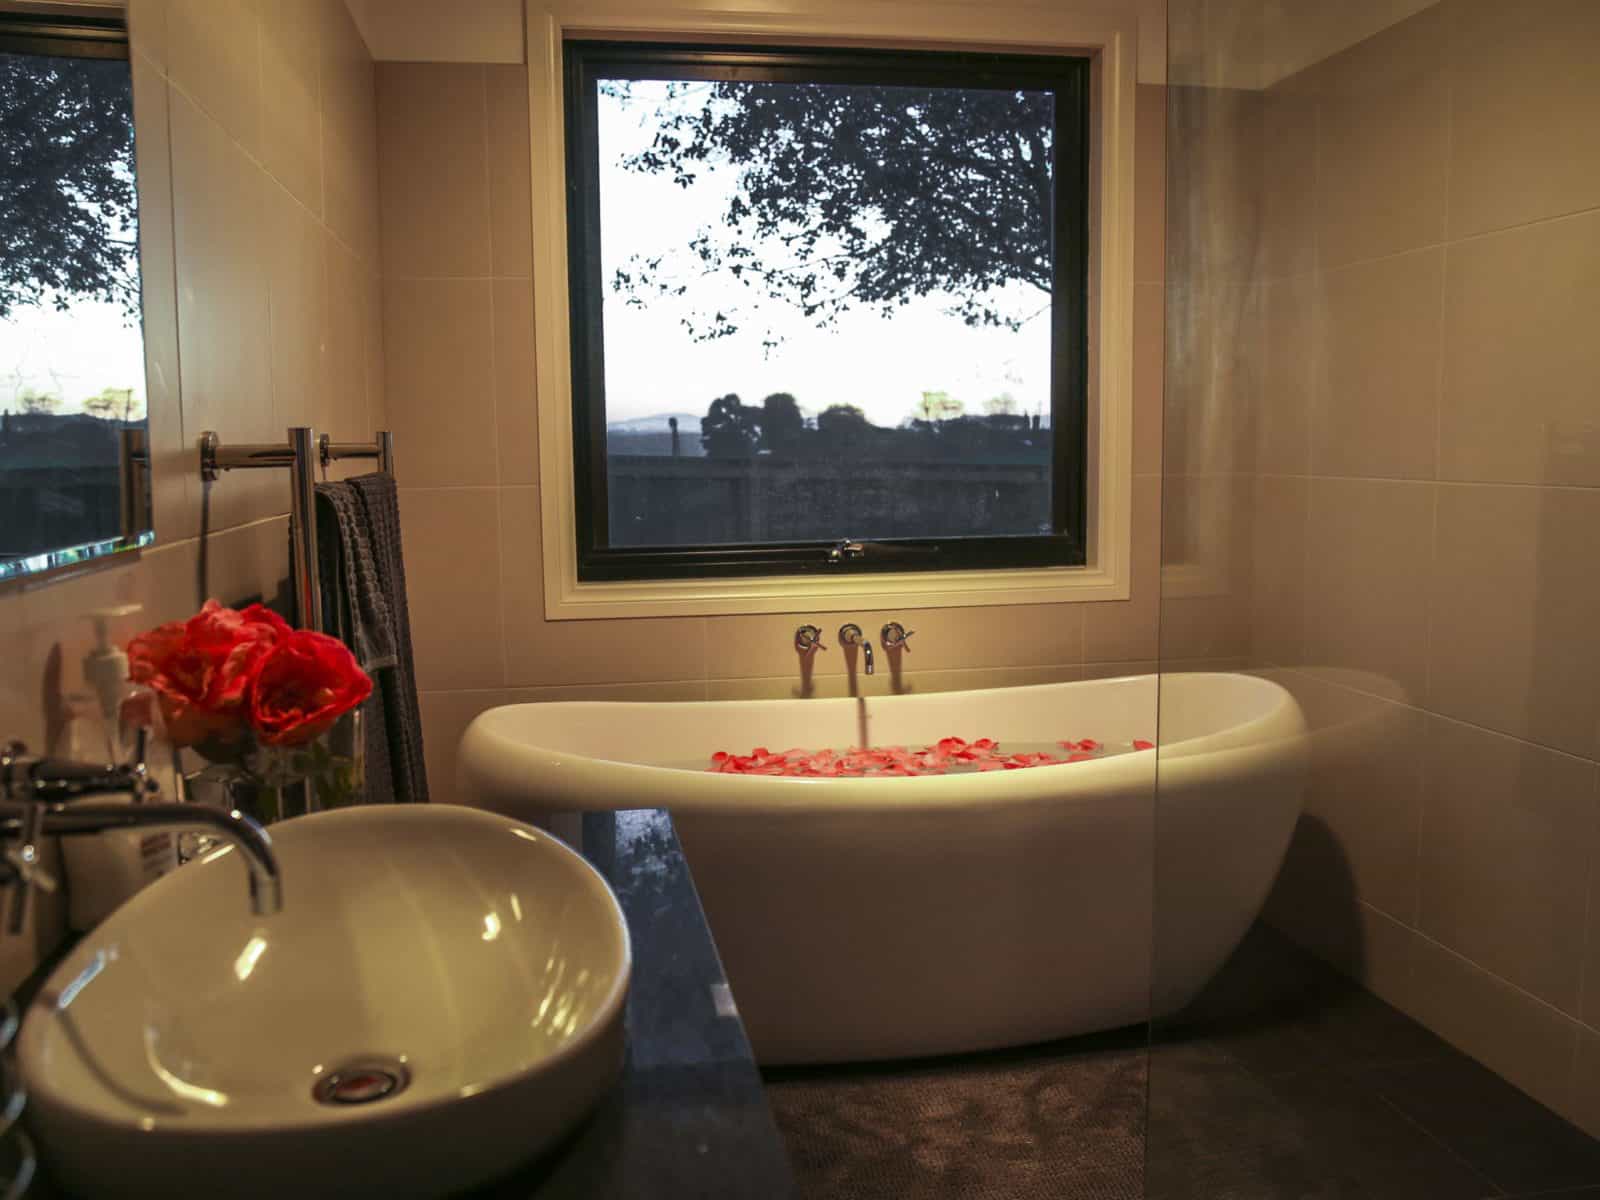 The magnificent bath tub in our new bathroom